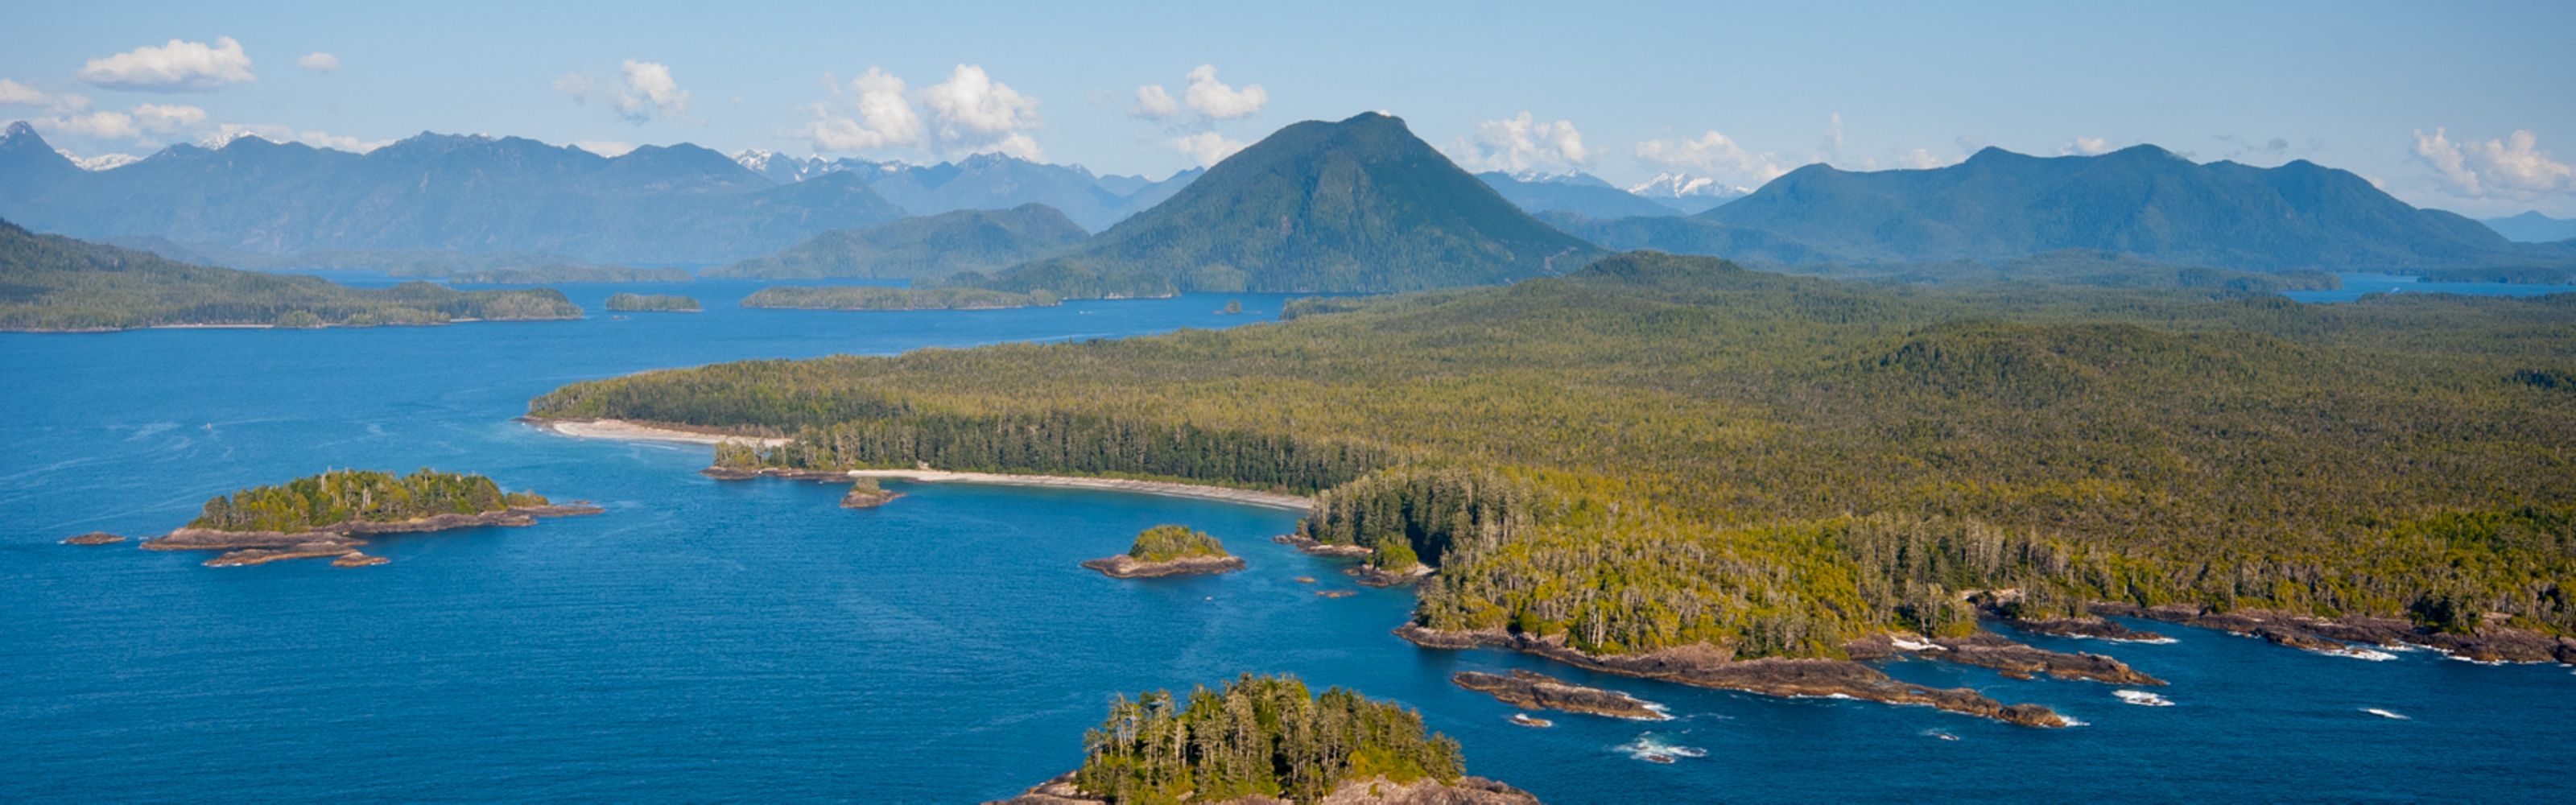 An aerial view of Clayoquot Sound, on the west coast of Vancouver Island in the Canadian province of British Columbia.  